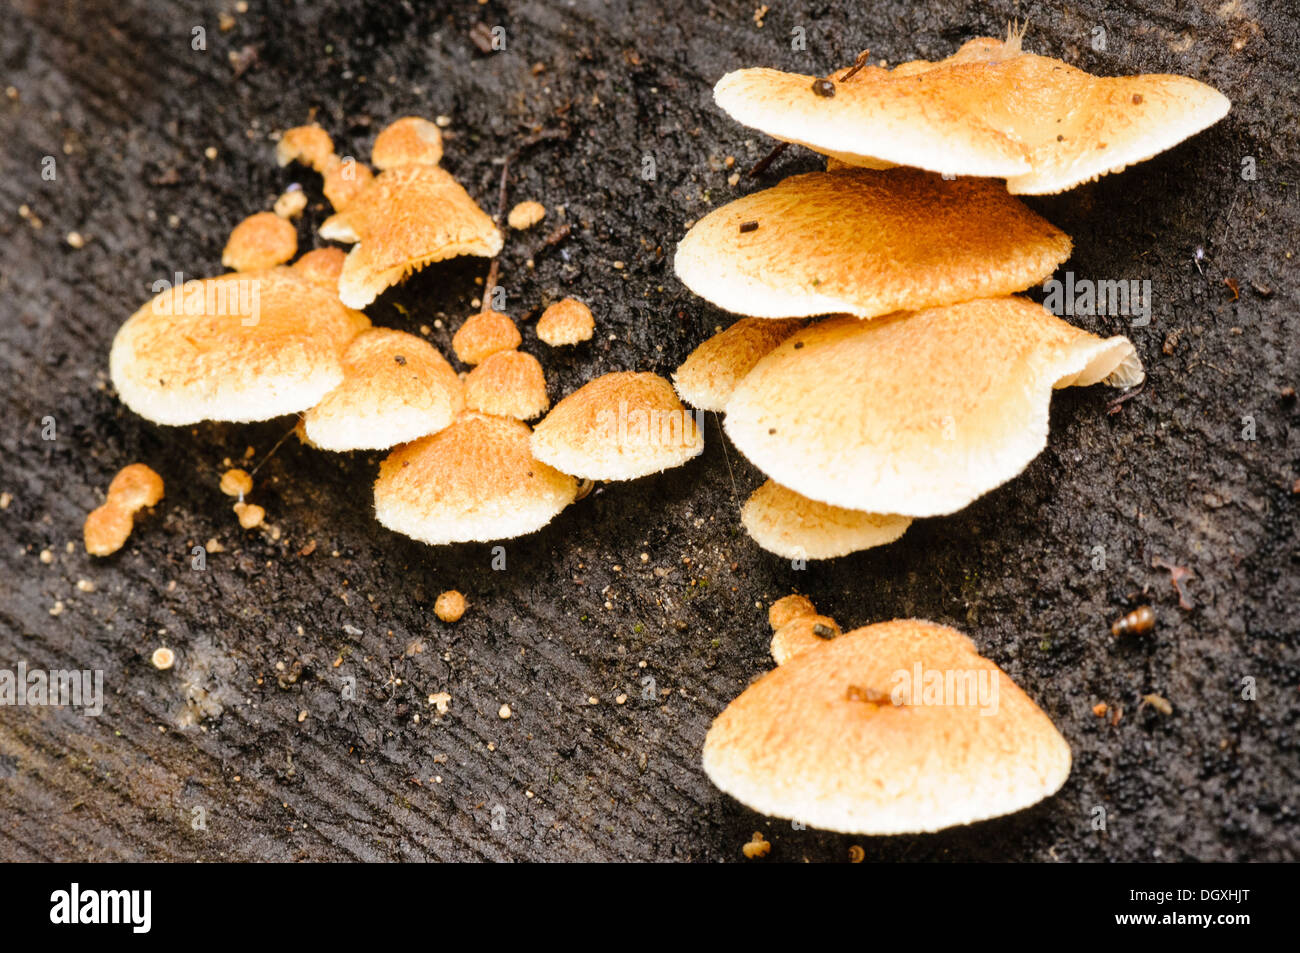 Soft slipper fungus (Crepidotus mollis), also known as jelly crep, commonly found on decaying wood Stock Photo